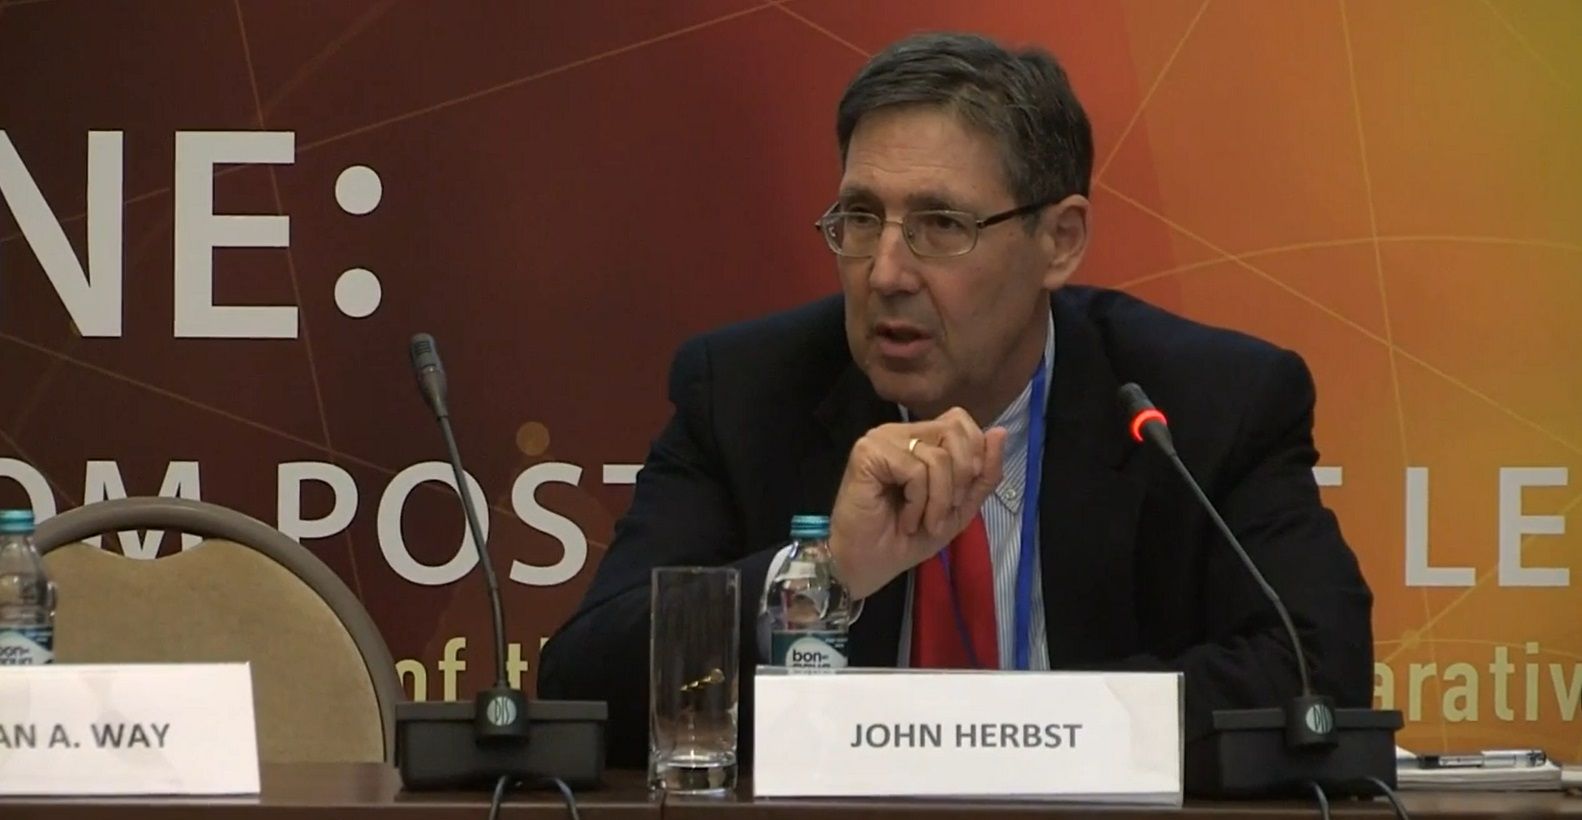 A Must-Read. John Herbst Speech: It’s Not Russia Against the West, It’s Reaction Against the Future